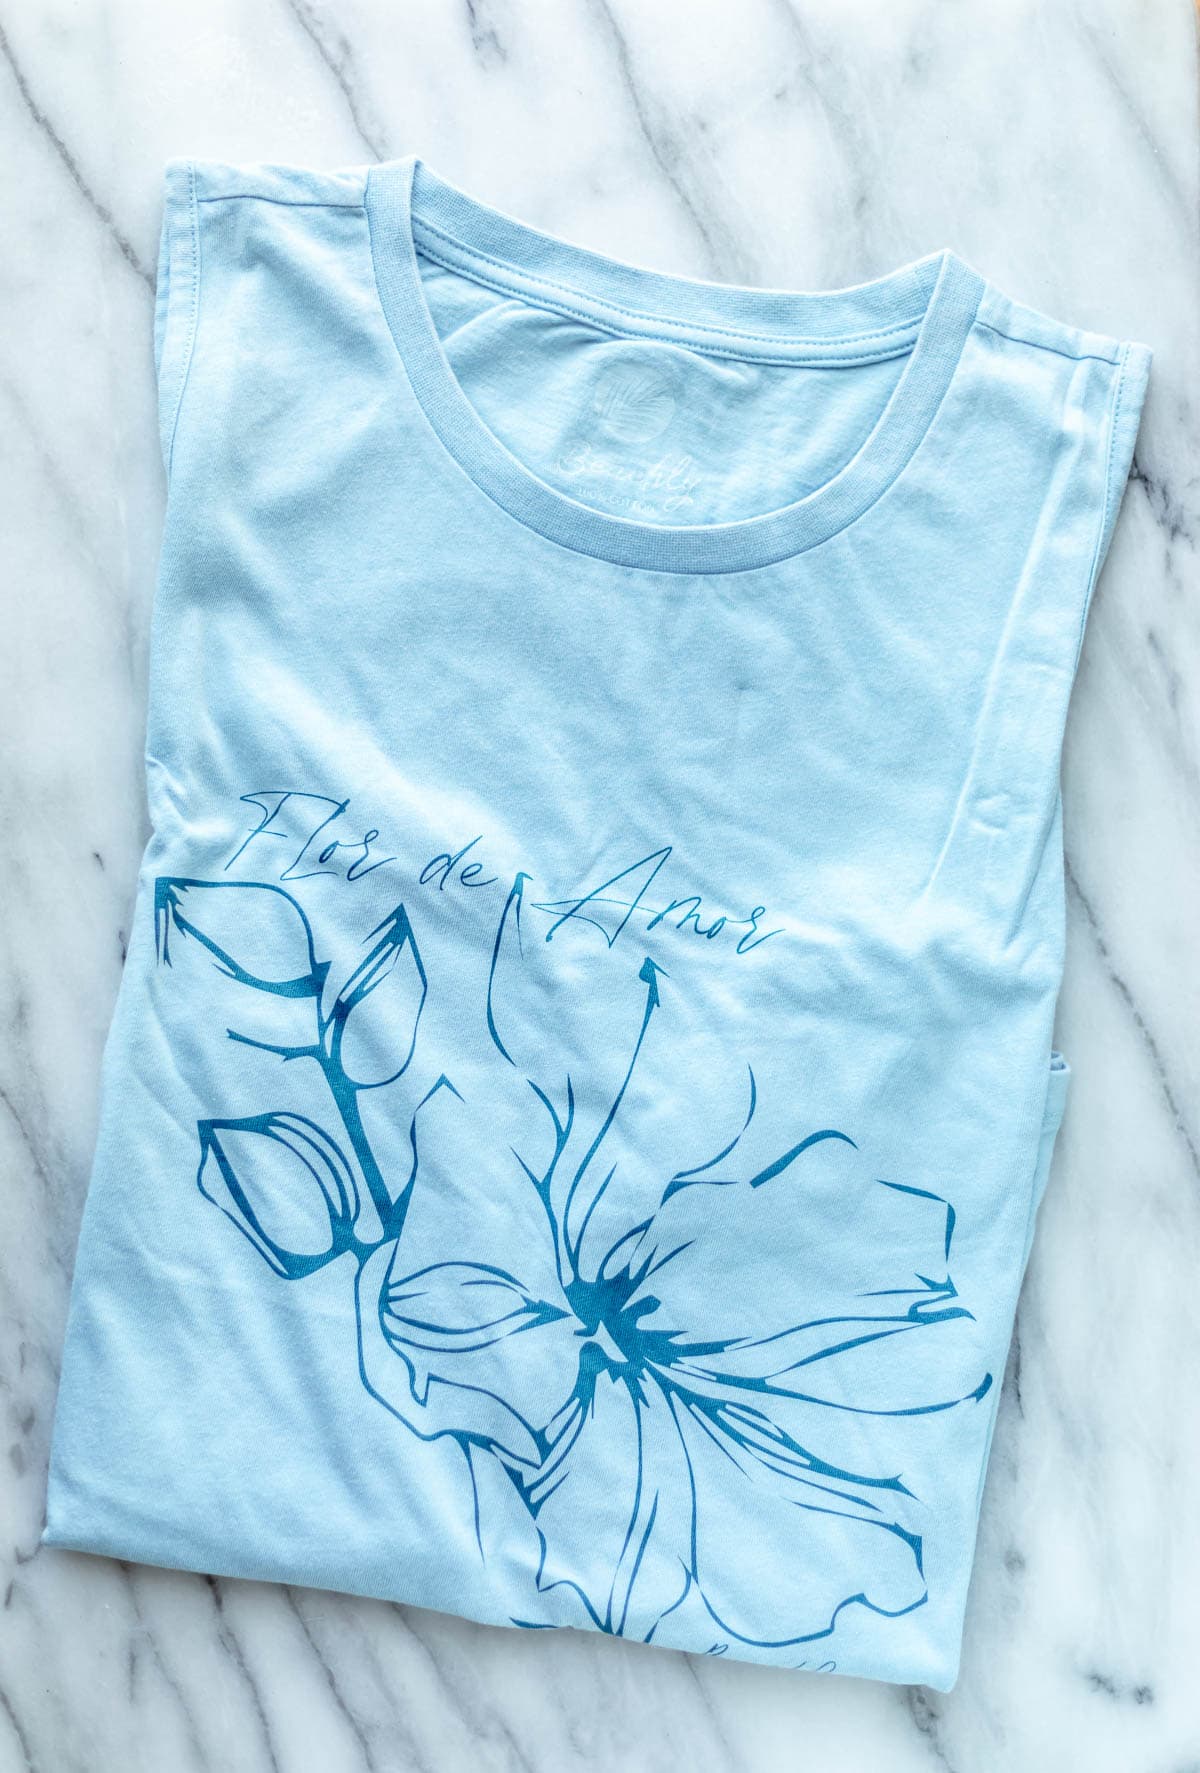 A blue tank top with a flower on it over a marble background.